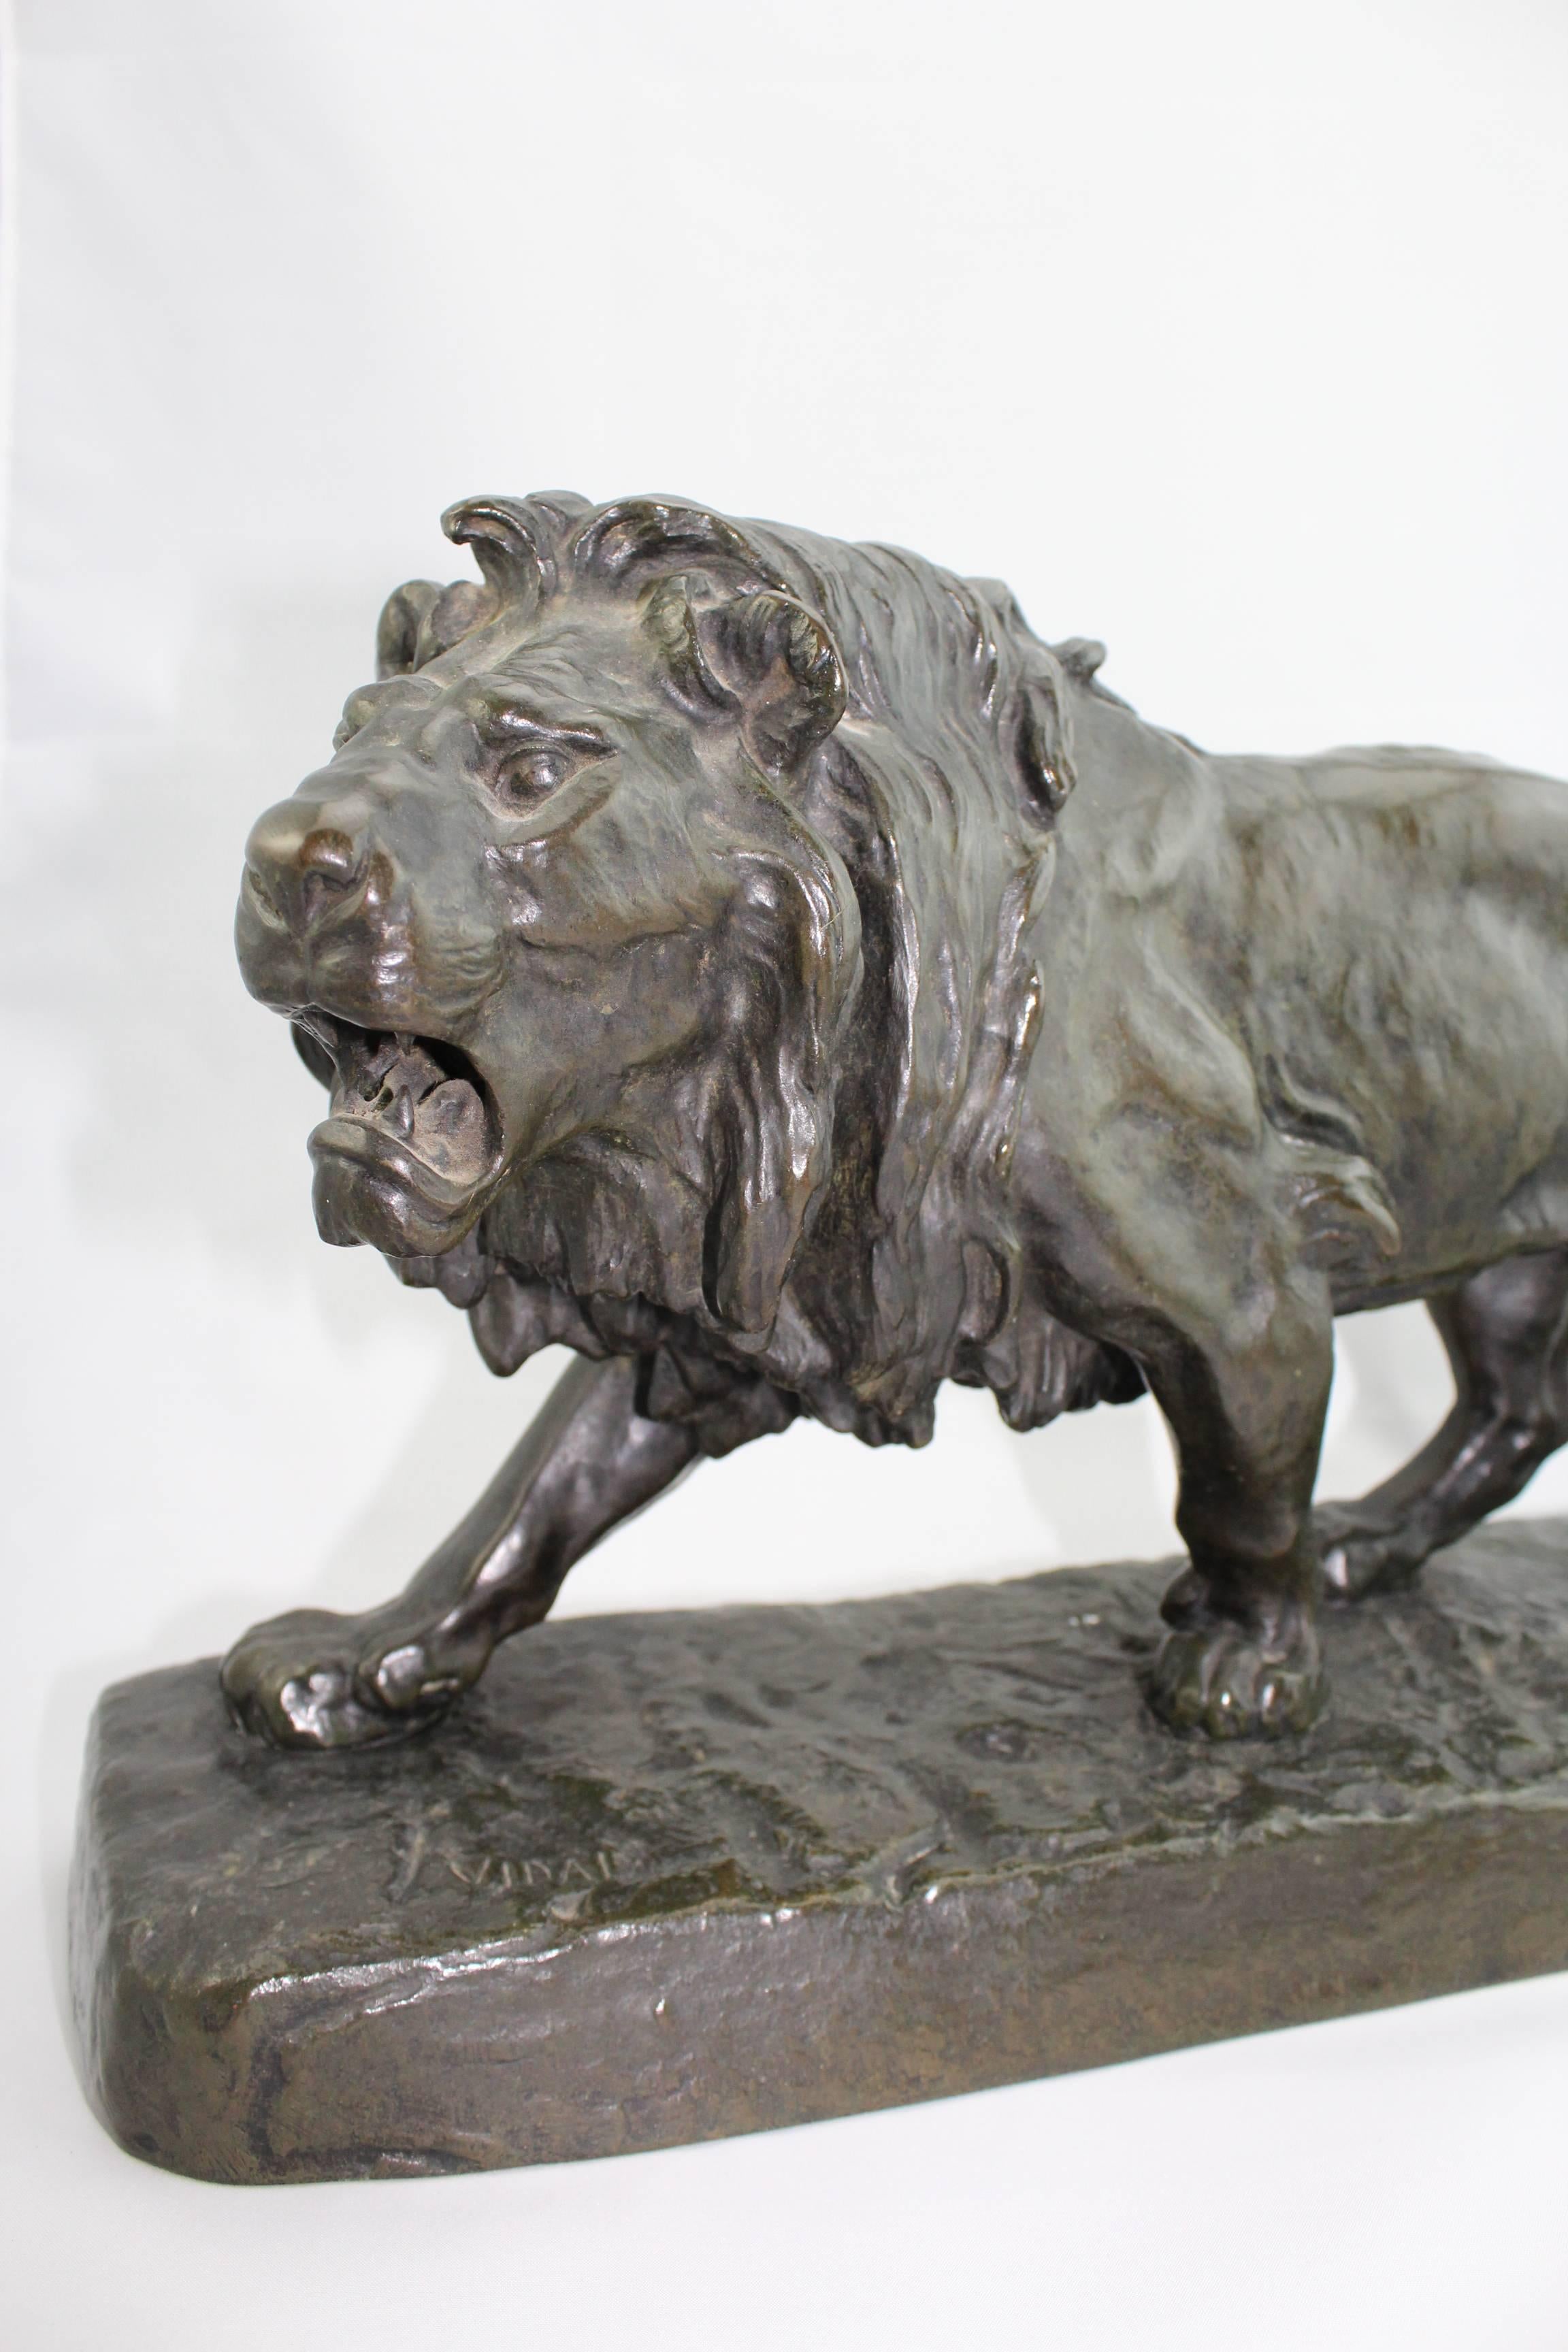 This is a 19th century Louis Vidal striding lion most probably finished and founded by Antoine Louis Barye.

Born in Nimes, France on December 6, 1831, Louis Vidal-Natavel pursued a successful career in sculpture in Paris despite a childhood eye